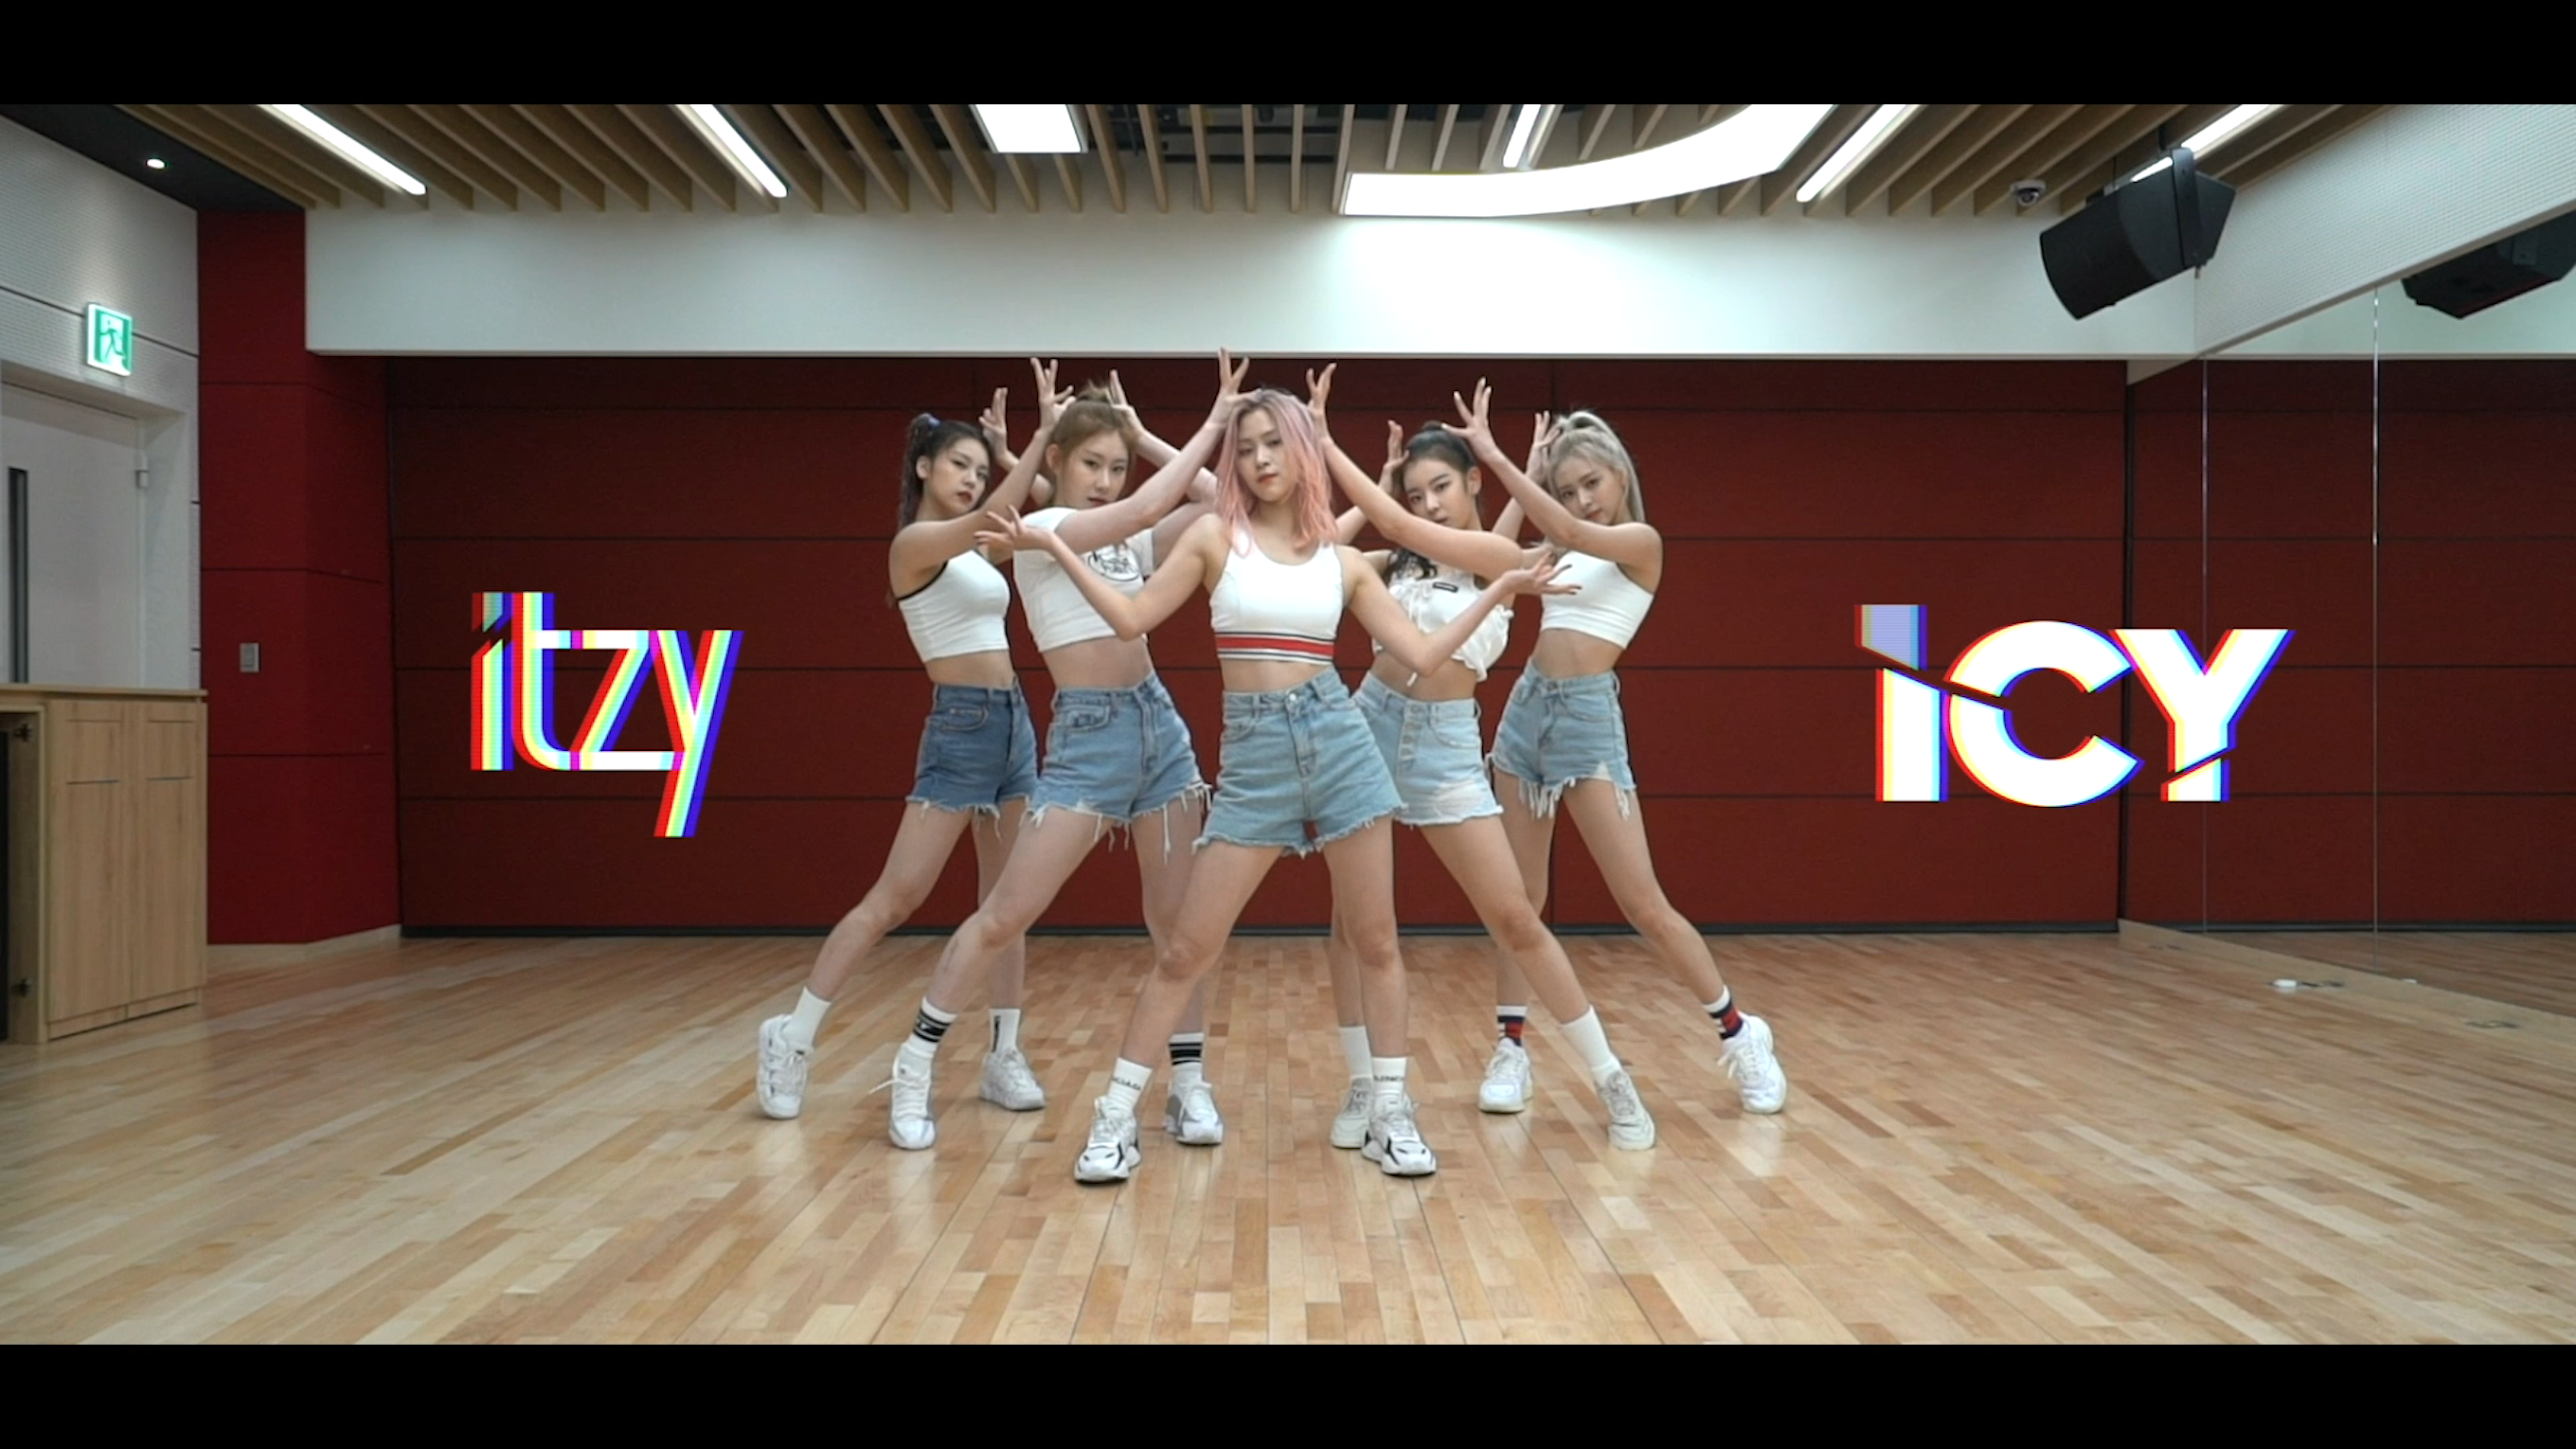 ITZY(있지) "ICY" Dance Practice